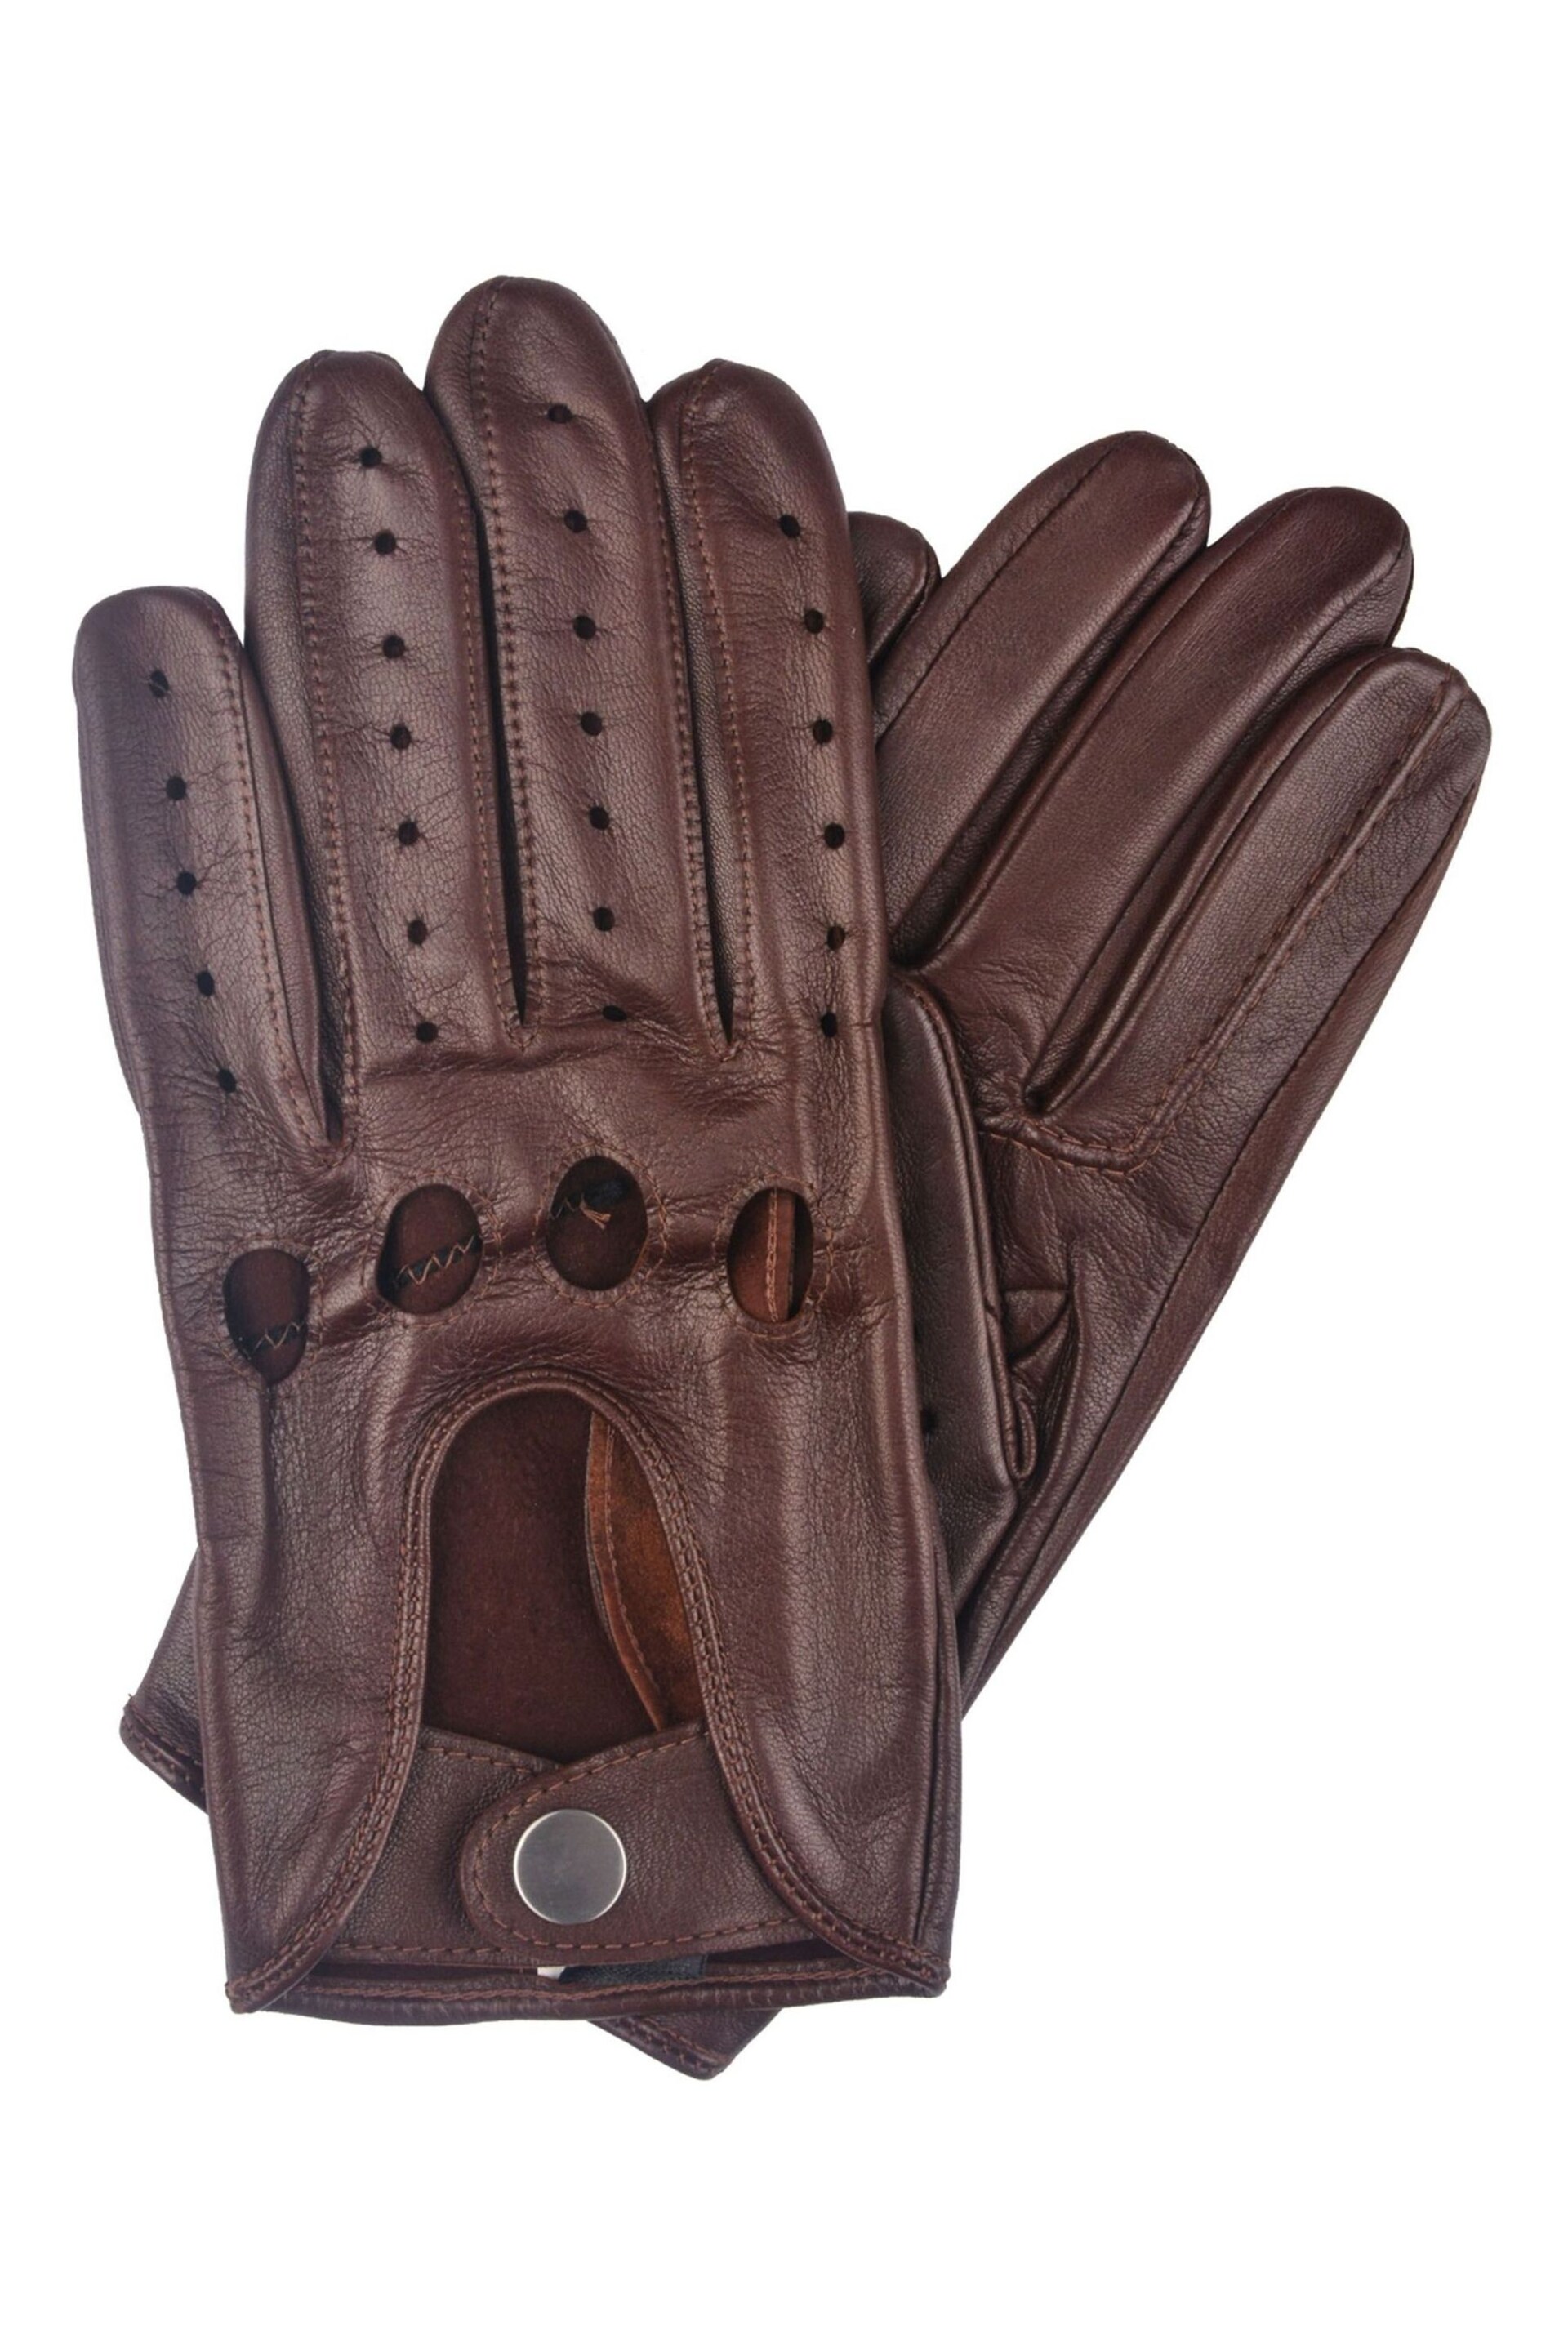 Lakeland Leather Brown Monza Leather Driving Gloves - Image 1 of 5